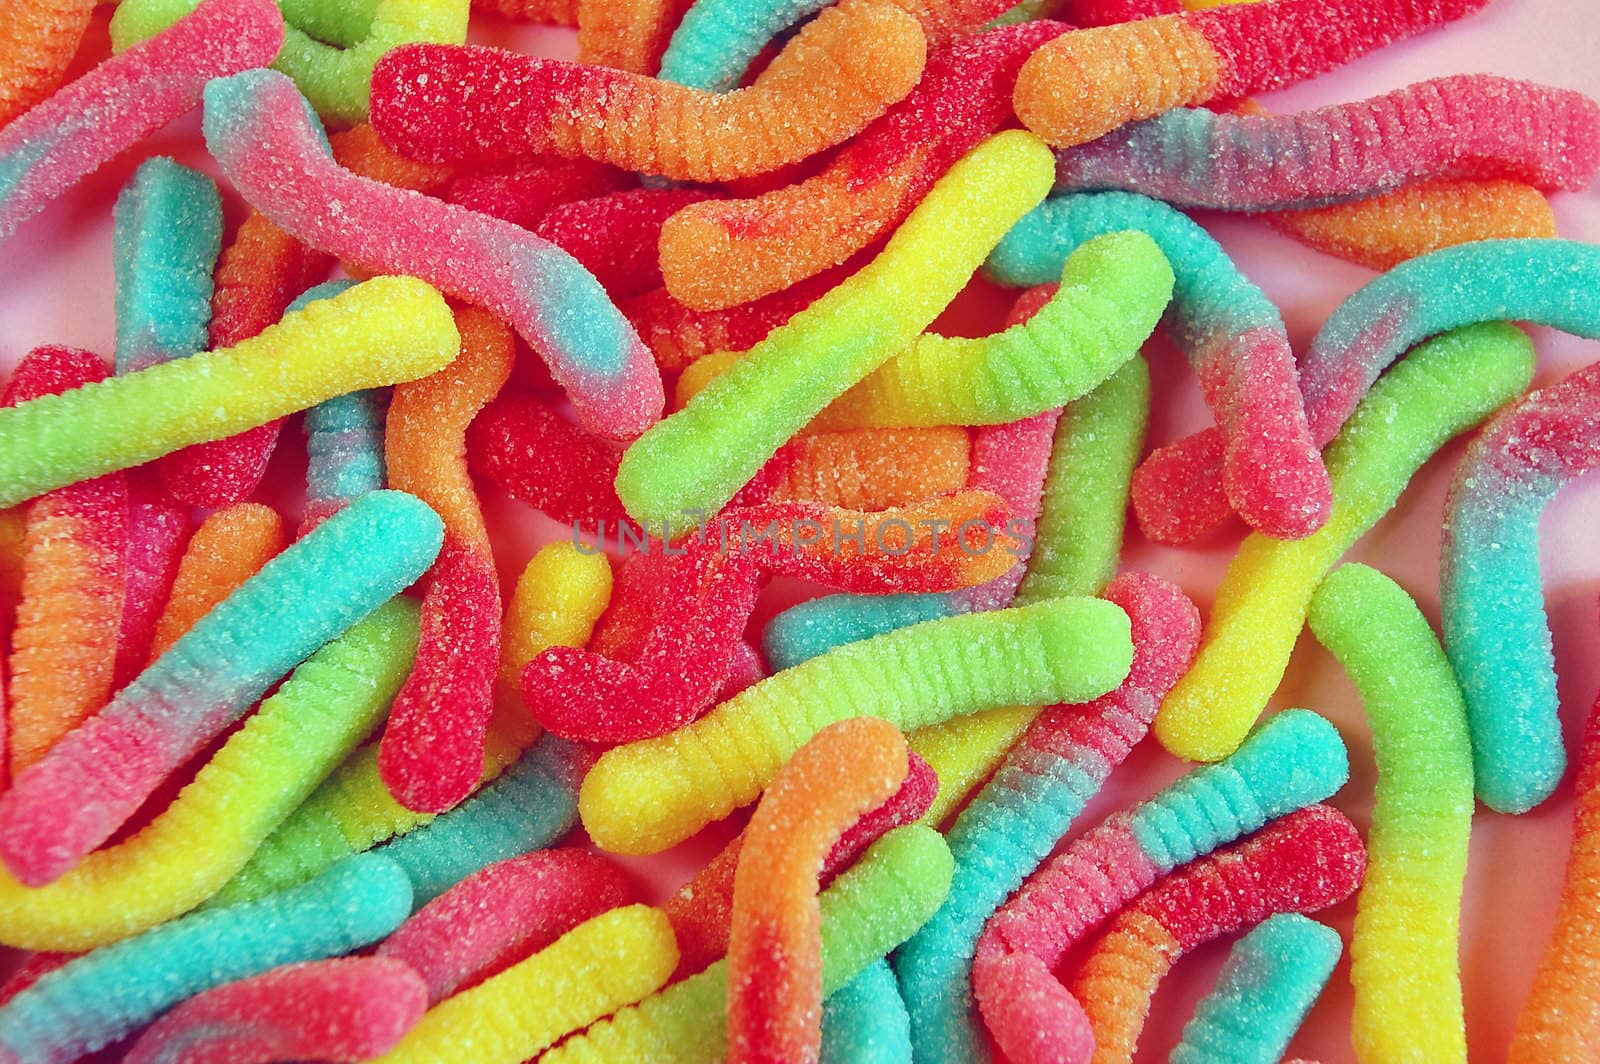 Colorful gummy worm candy